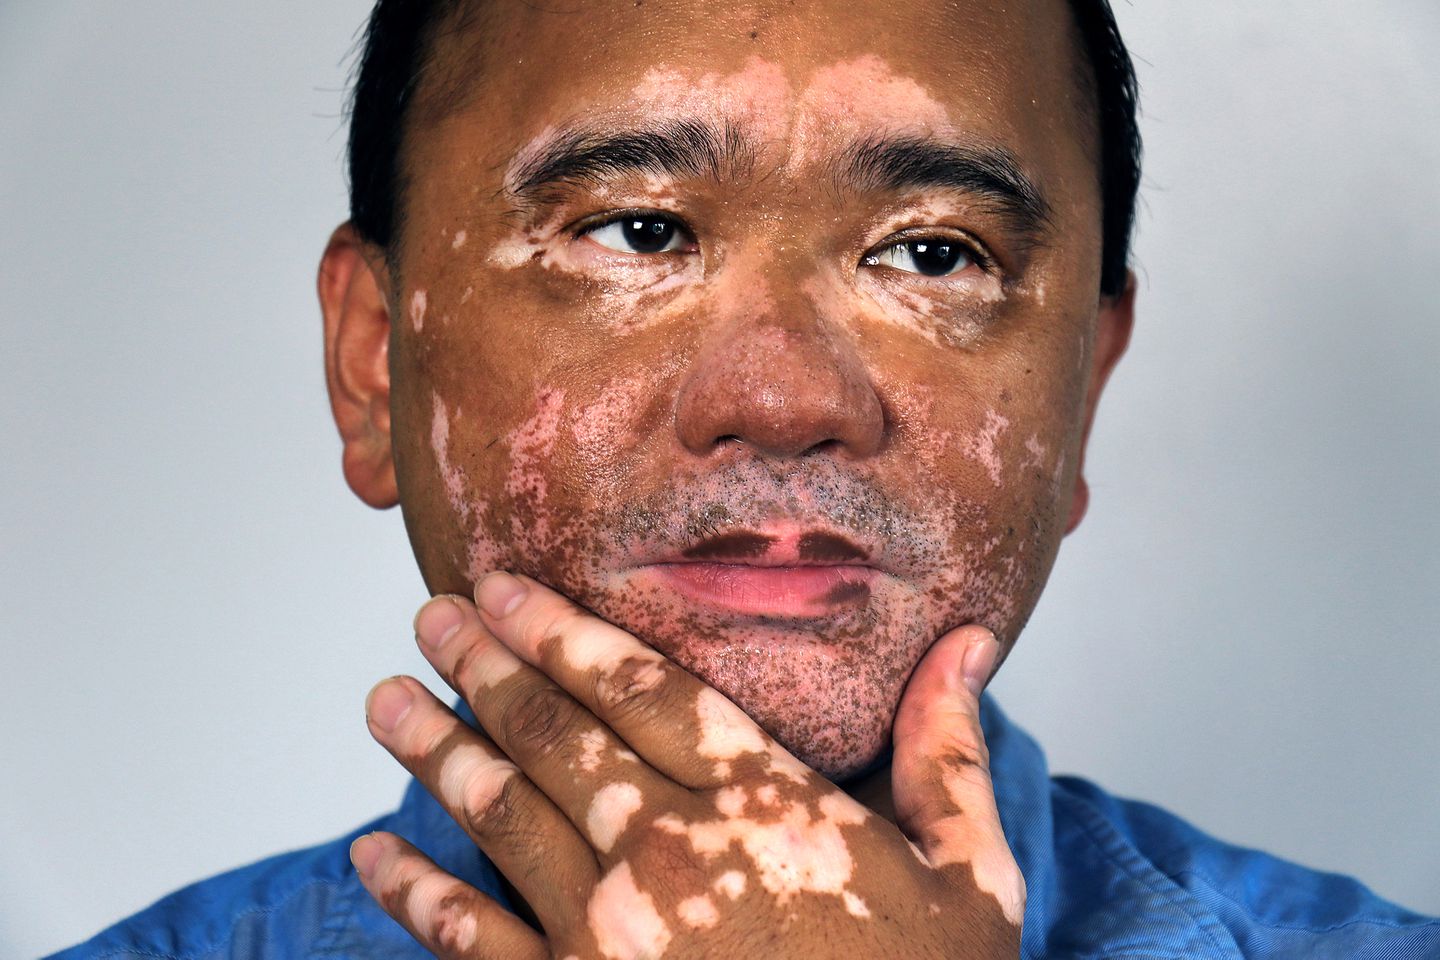 How can vitiligo affect your emotional well-being?